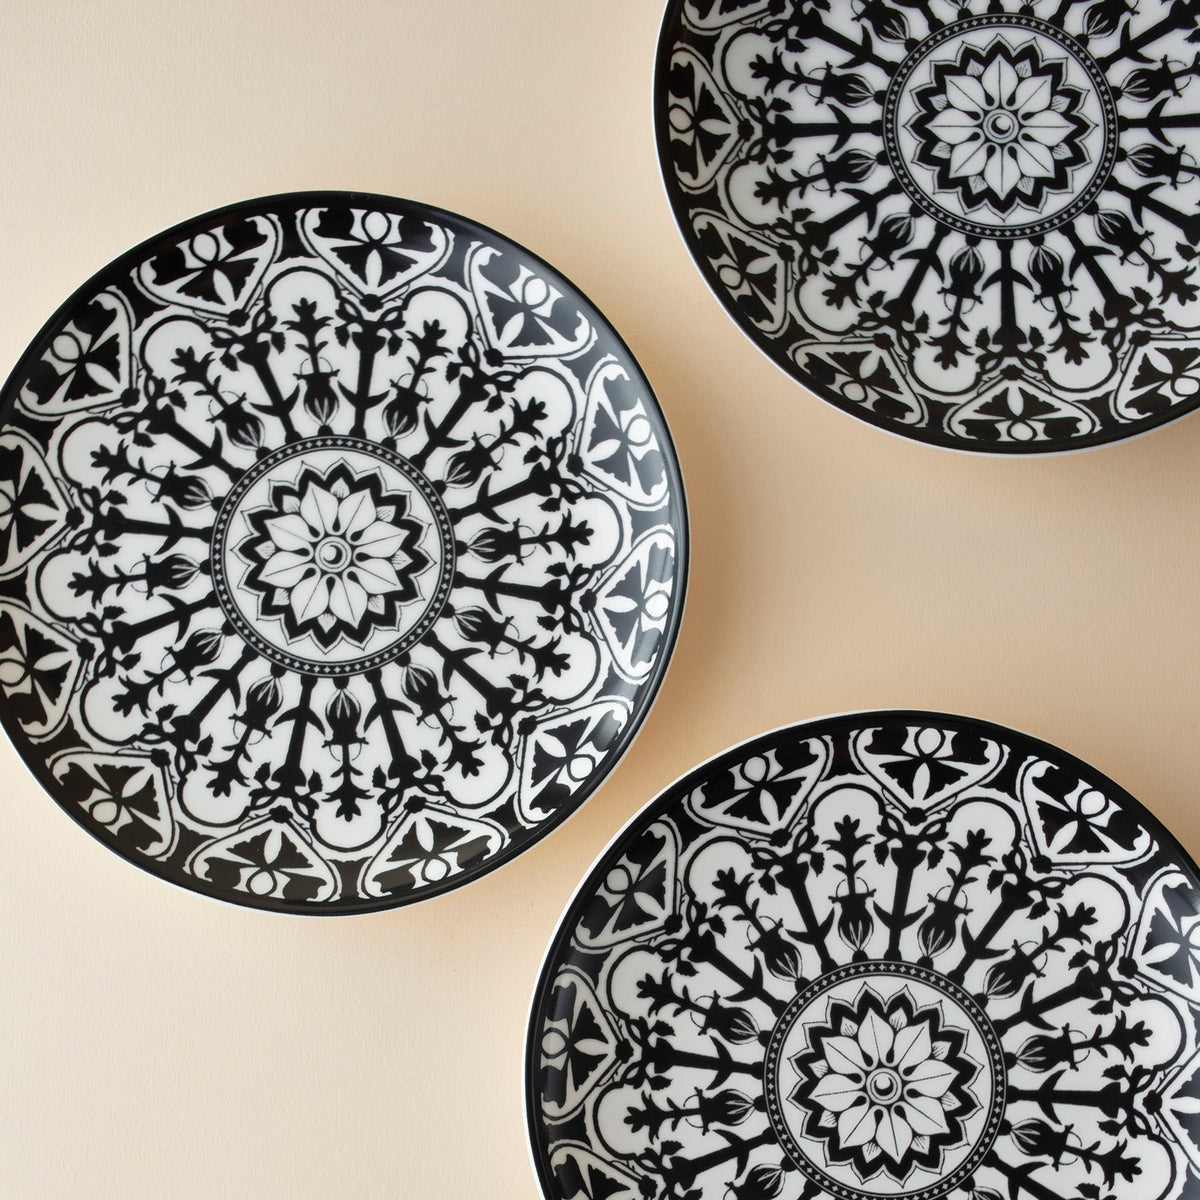 Three Casablanca Canapé Plates from the Caskata Artisanal Home Geometrics Collection with designs on them.